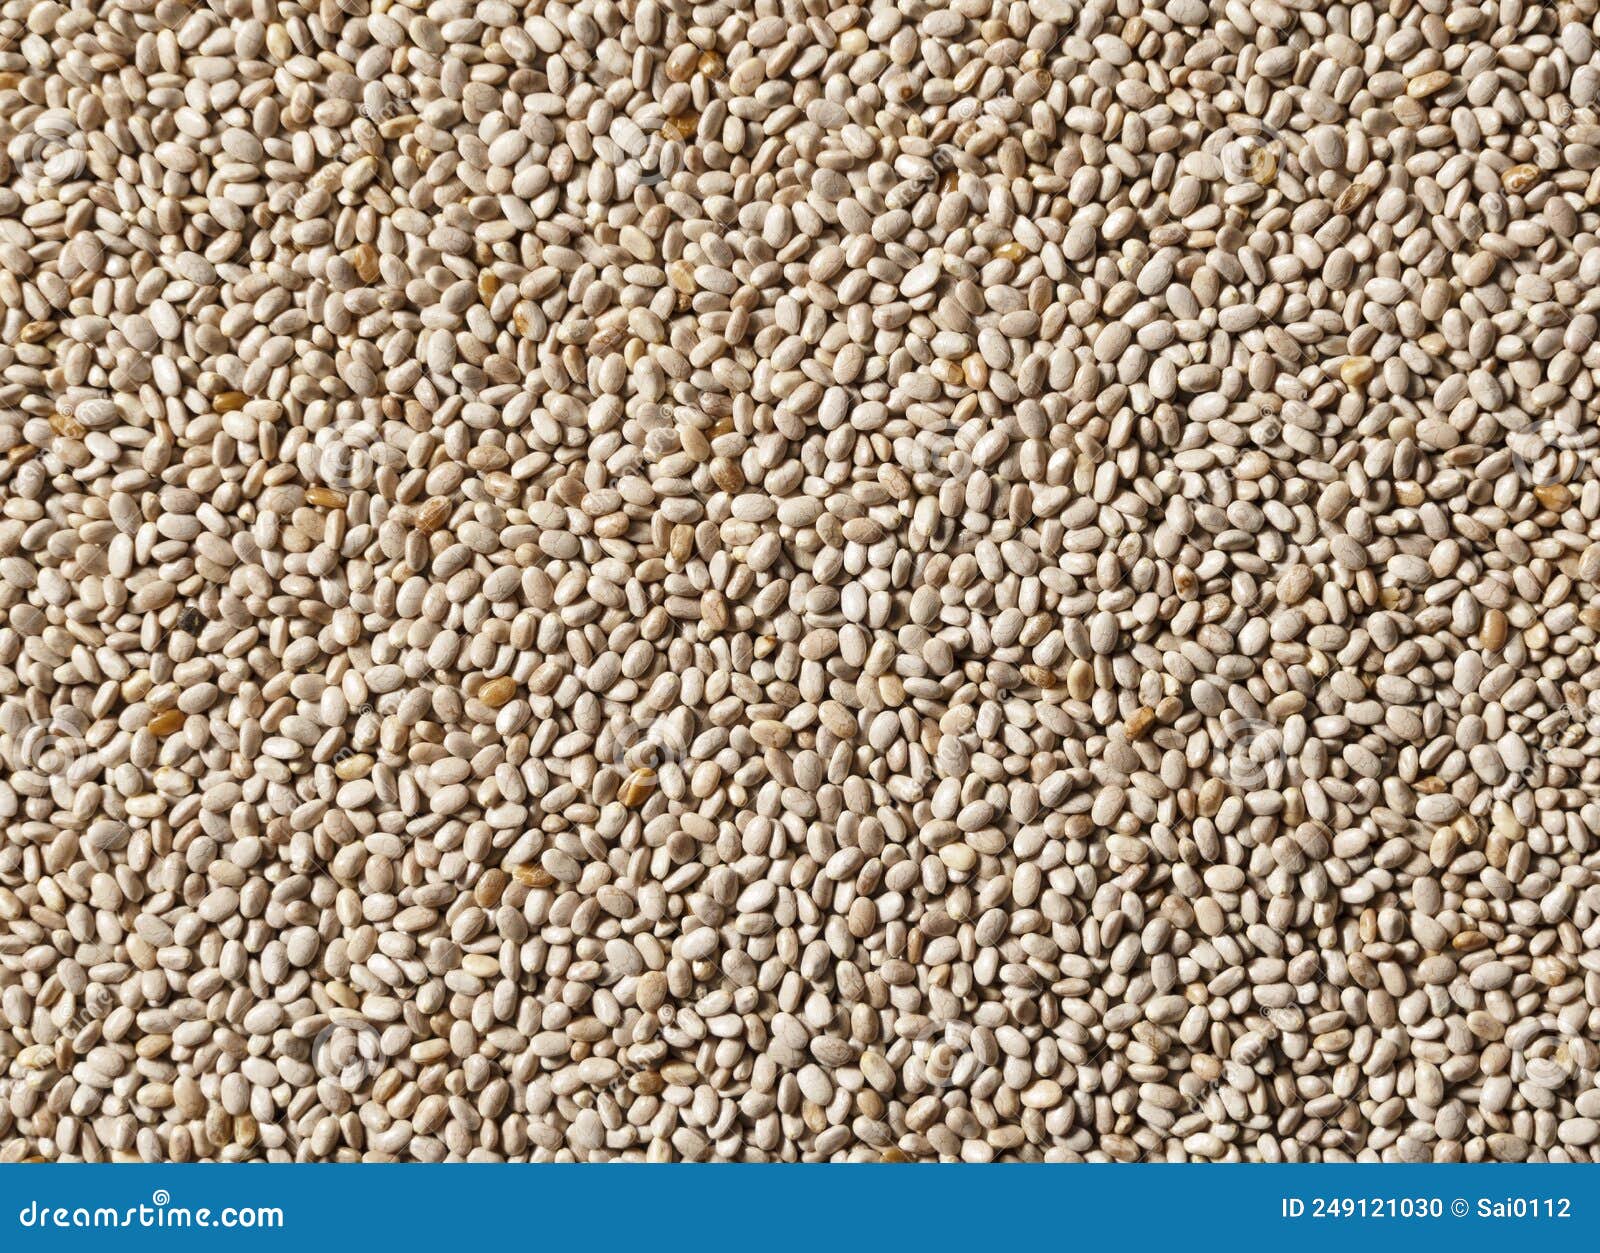 White Chia Seeds Throughout the Screen Stock Photo - Image of seed ...